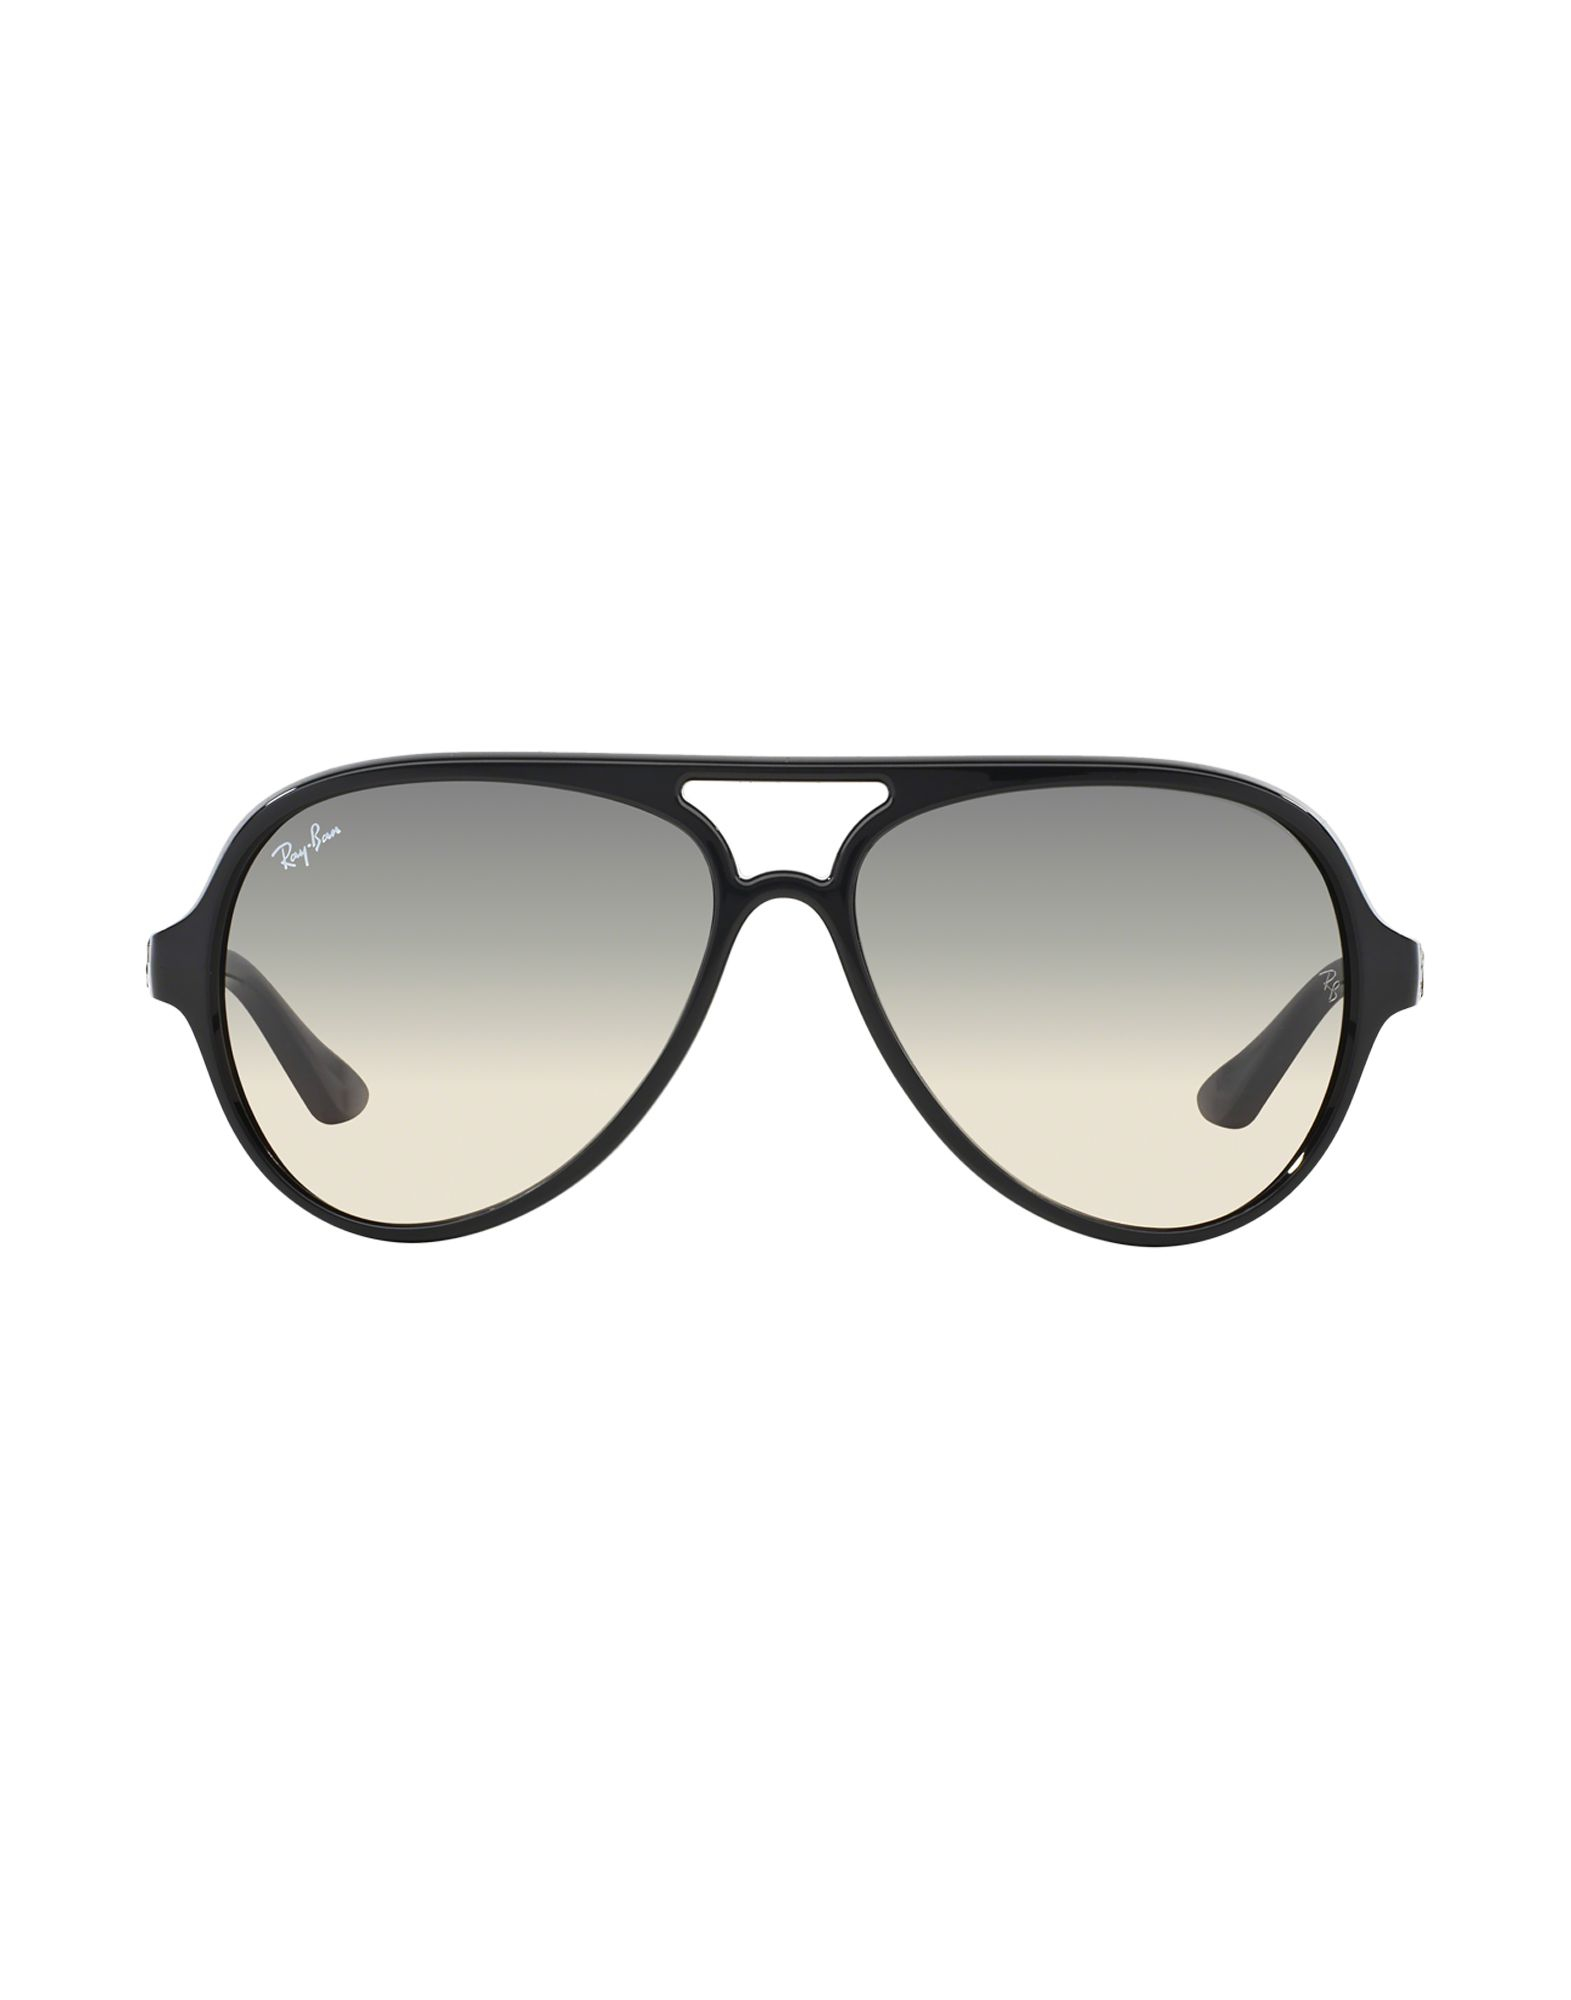 Ray-Ban Sunglasses in Black for Men - Lyst